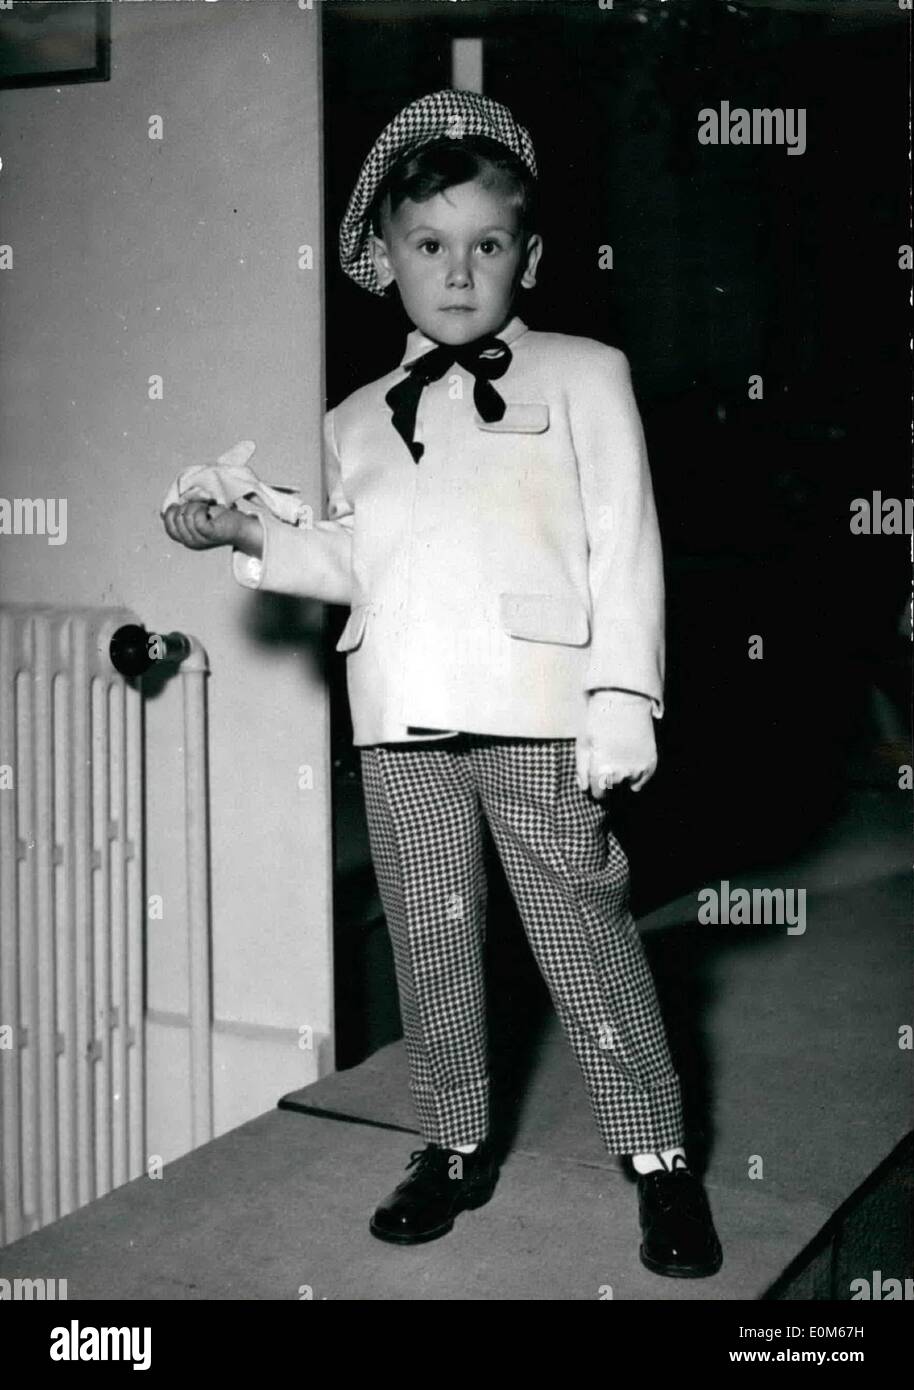 Sep. 09, 1953 - Paris' Latest Fashion For our Children: ''Enfantillage'' has presented her latest models (Autumn - Winter 1953-1954) for Children. Checked Trousers Black and White, Jacket in Lemon Coloured Suedine with a Black Velvet Bow, To-a - shanter Checked black and white. Stock Photo